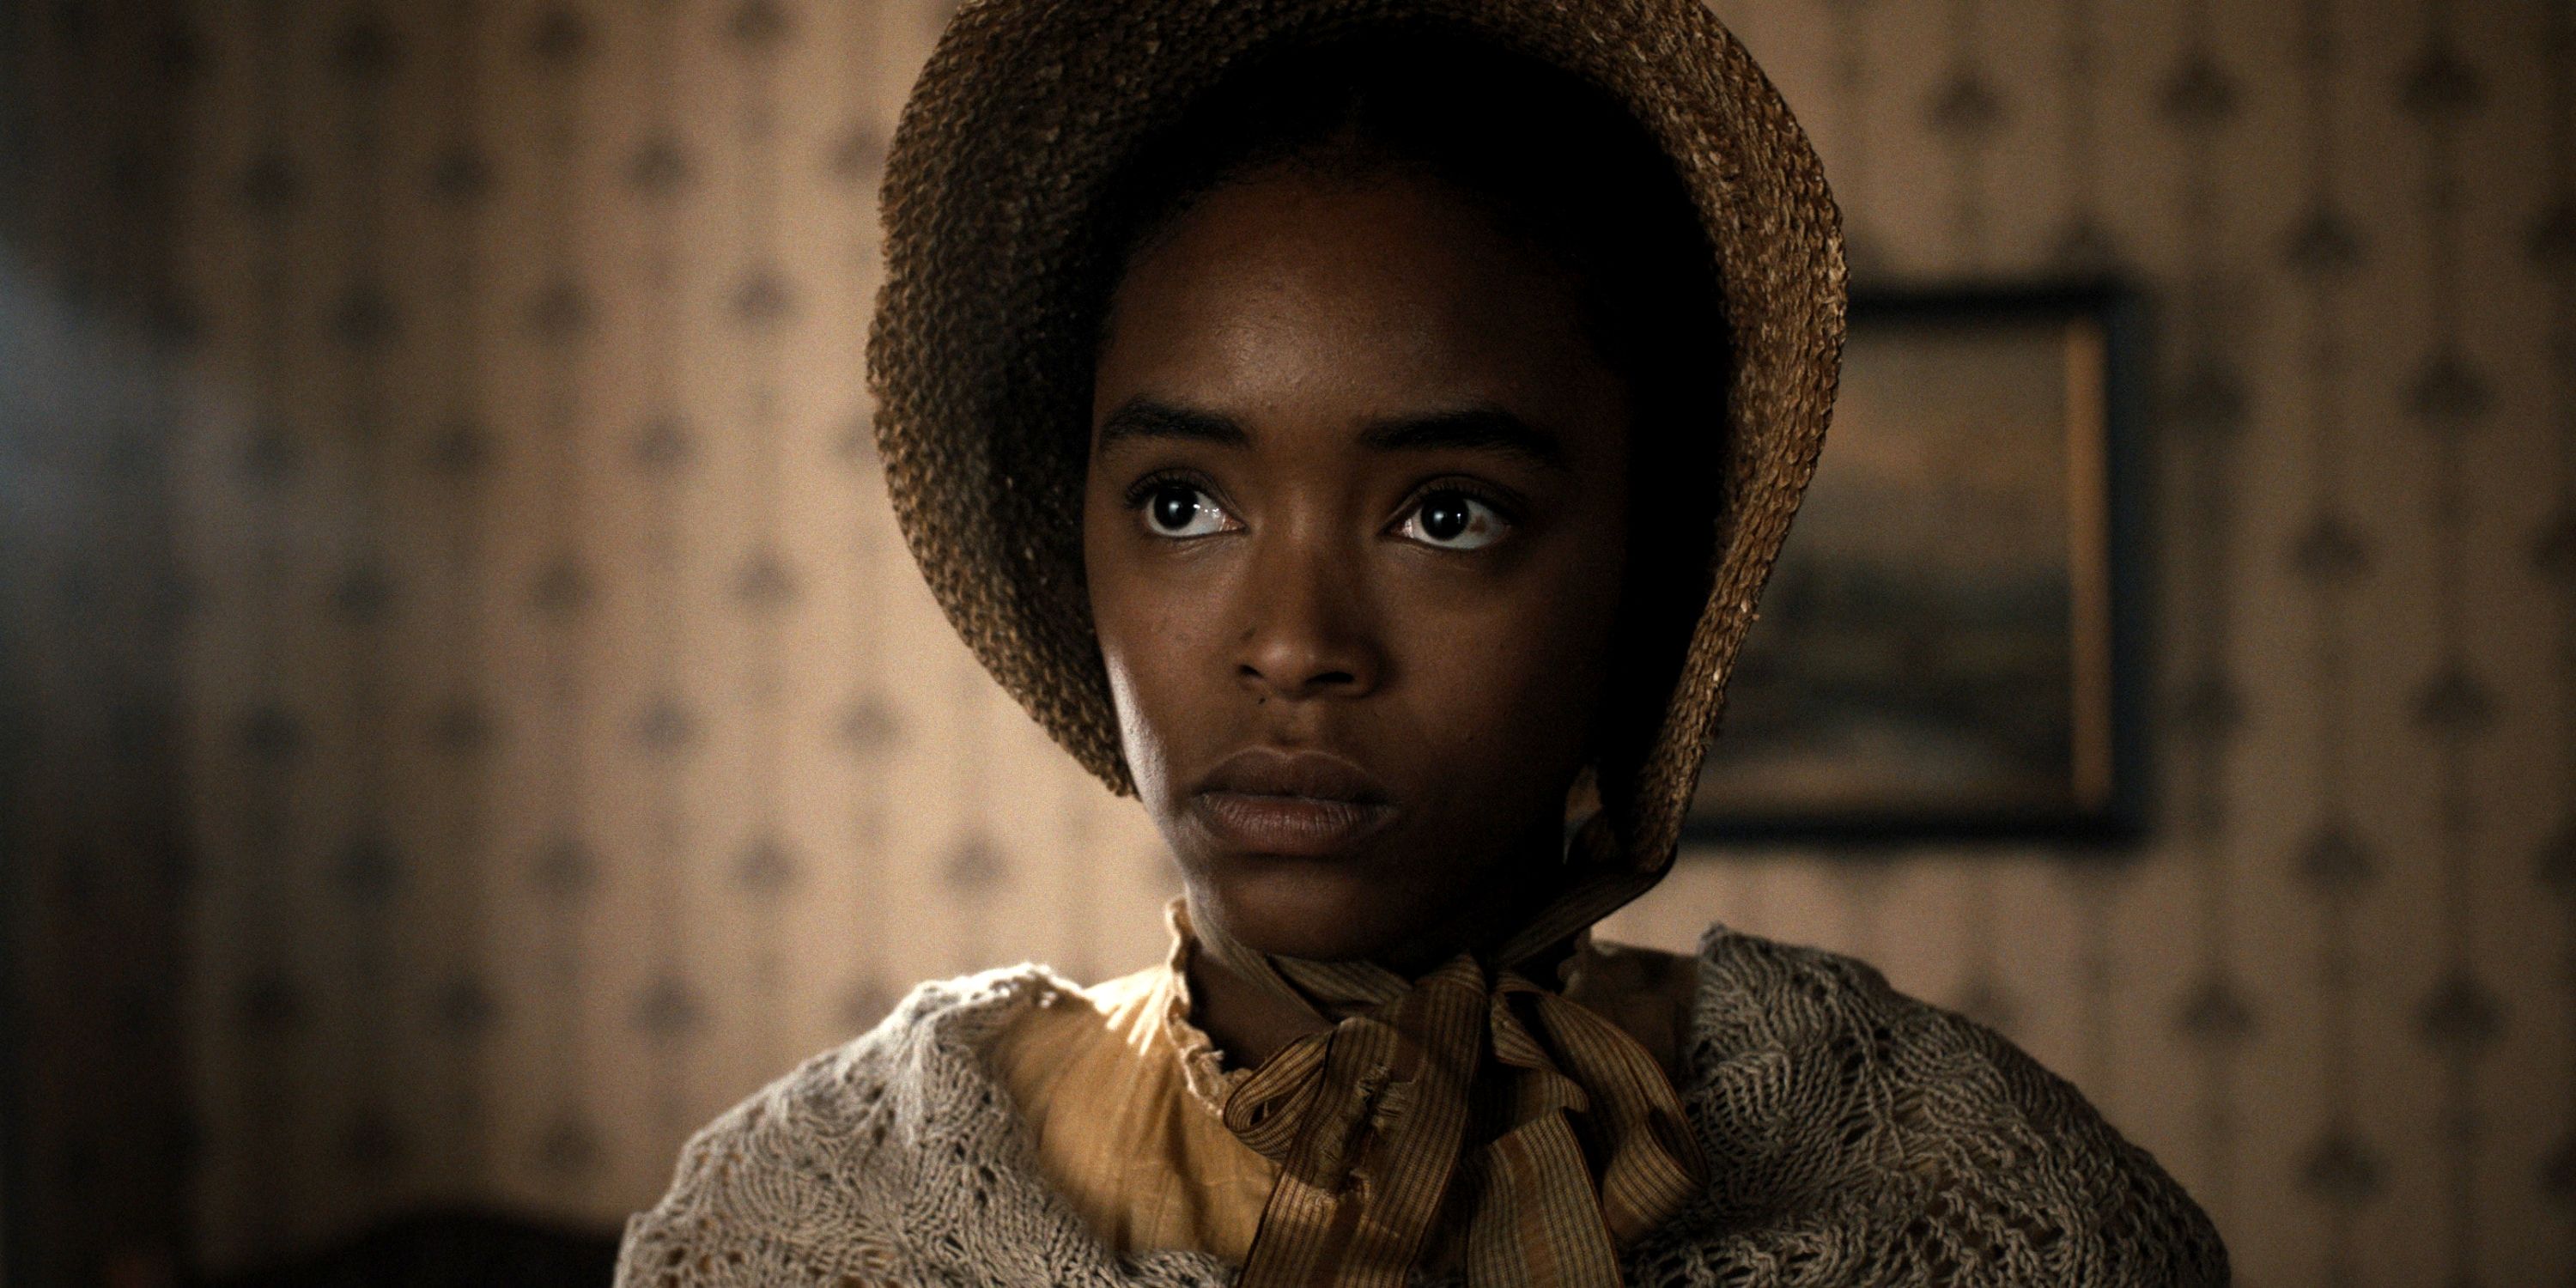 Lovie Simone as Mary Simms wearing a bonnet in Episode 5 Manhunt